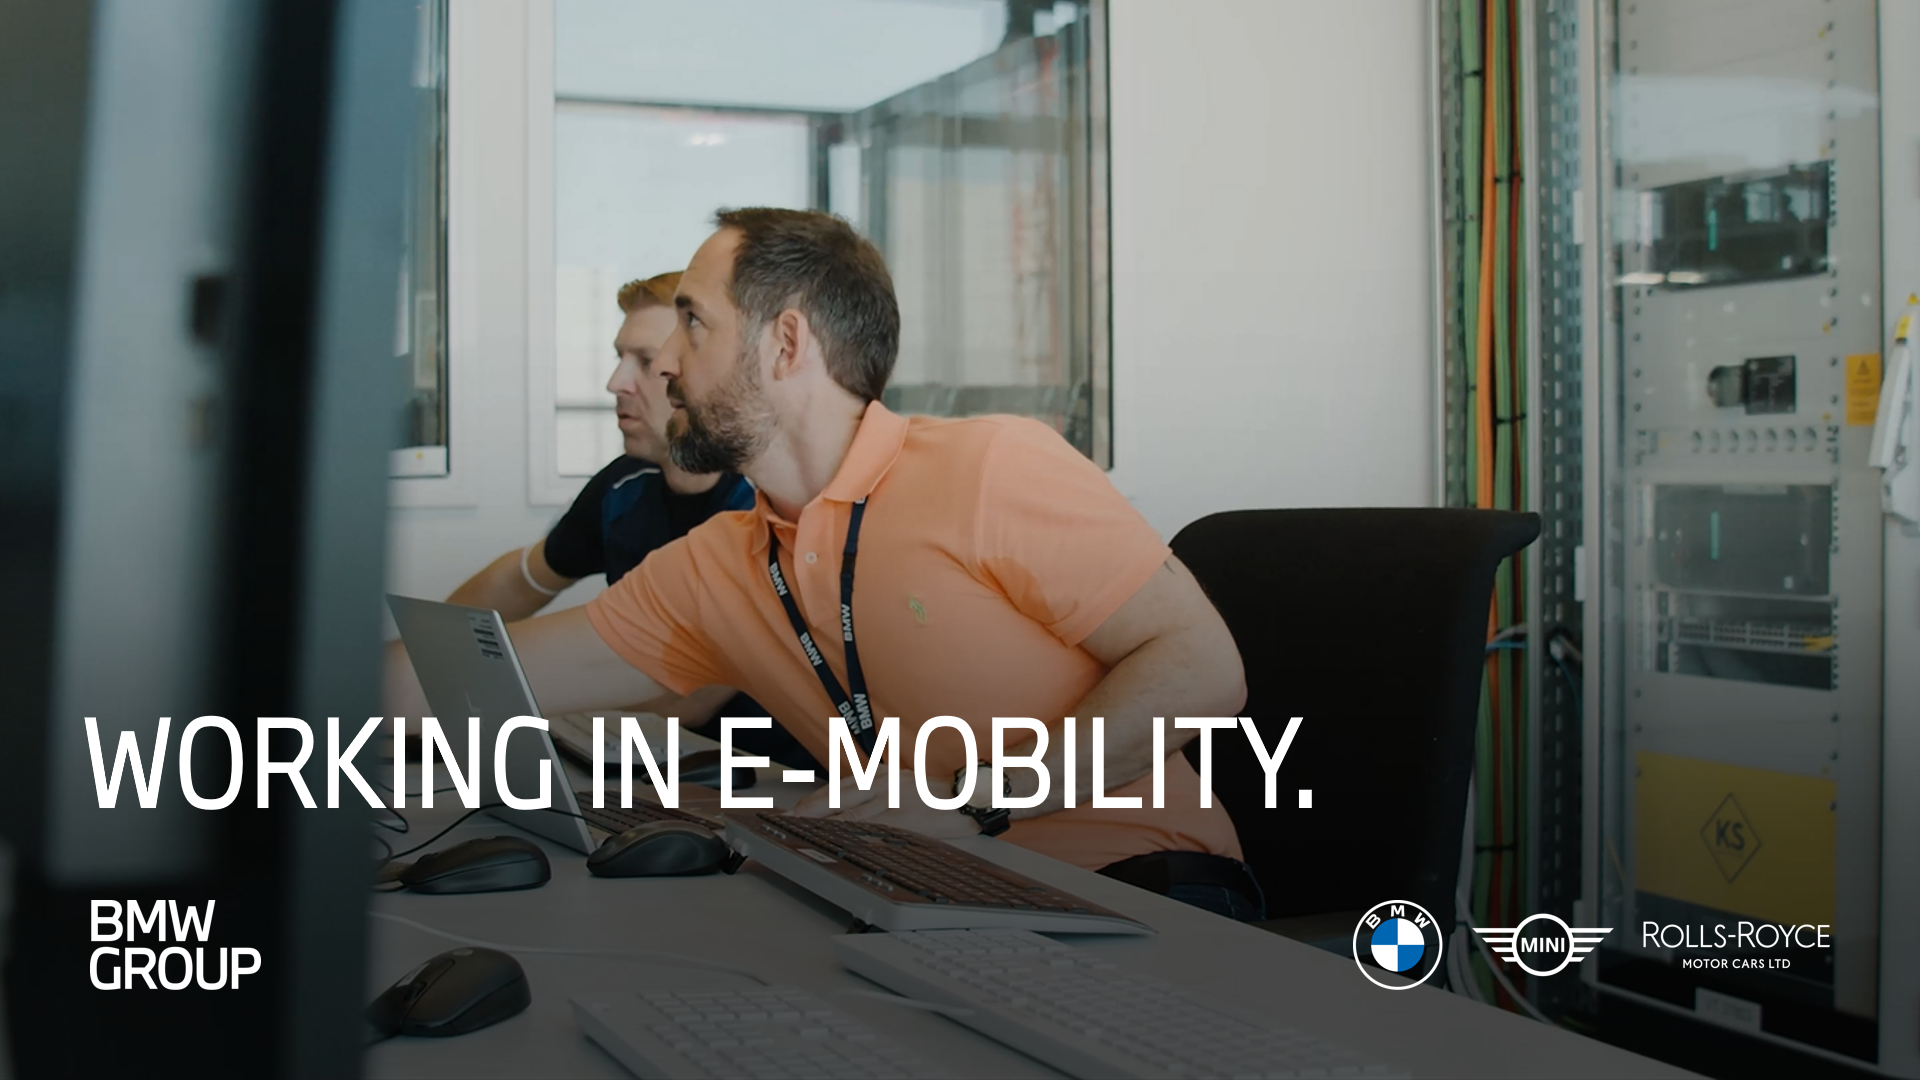 The mobility of the future at the BMW Group is electric.